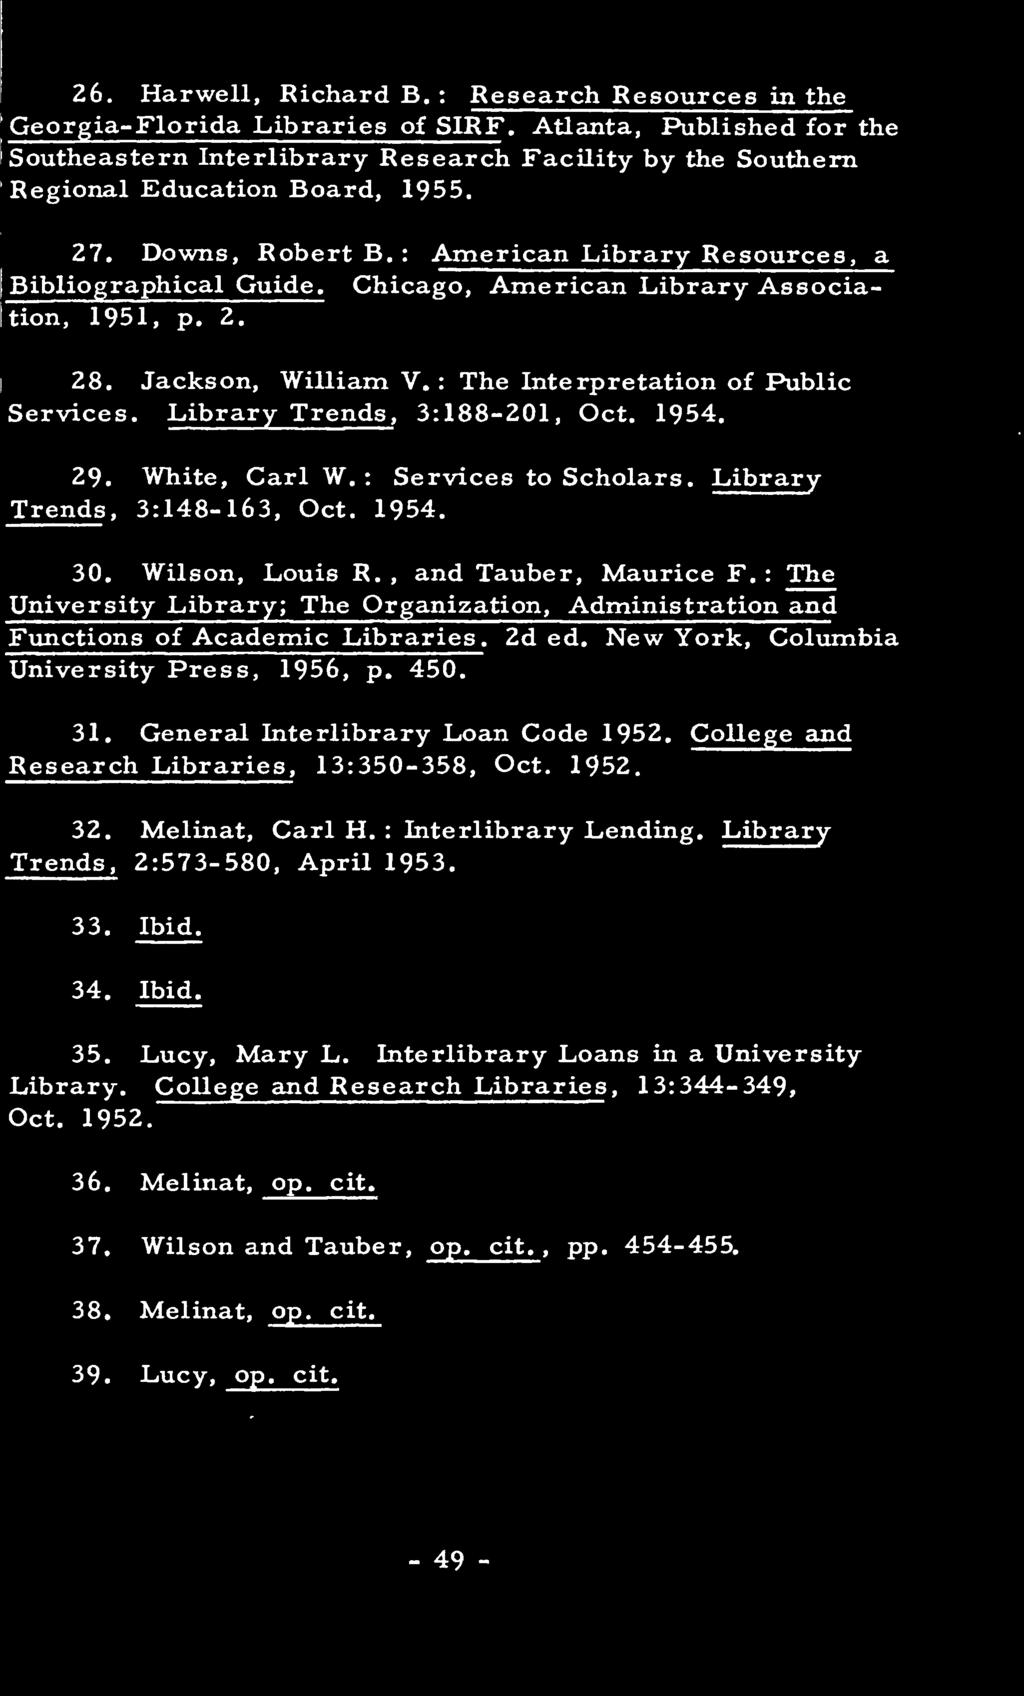 : The University Library; The Organization, Administration and Functions of Academic Libraries. 2d ed. New York, Columbia University Press, 1956, p. 450. 31.